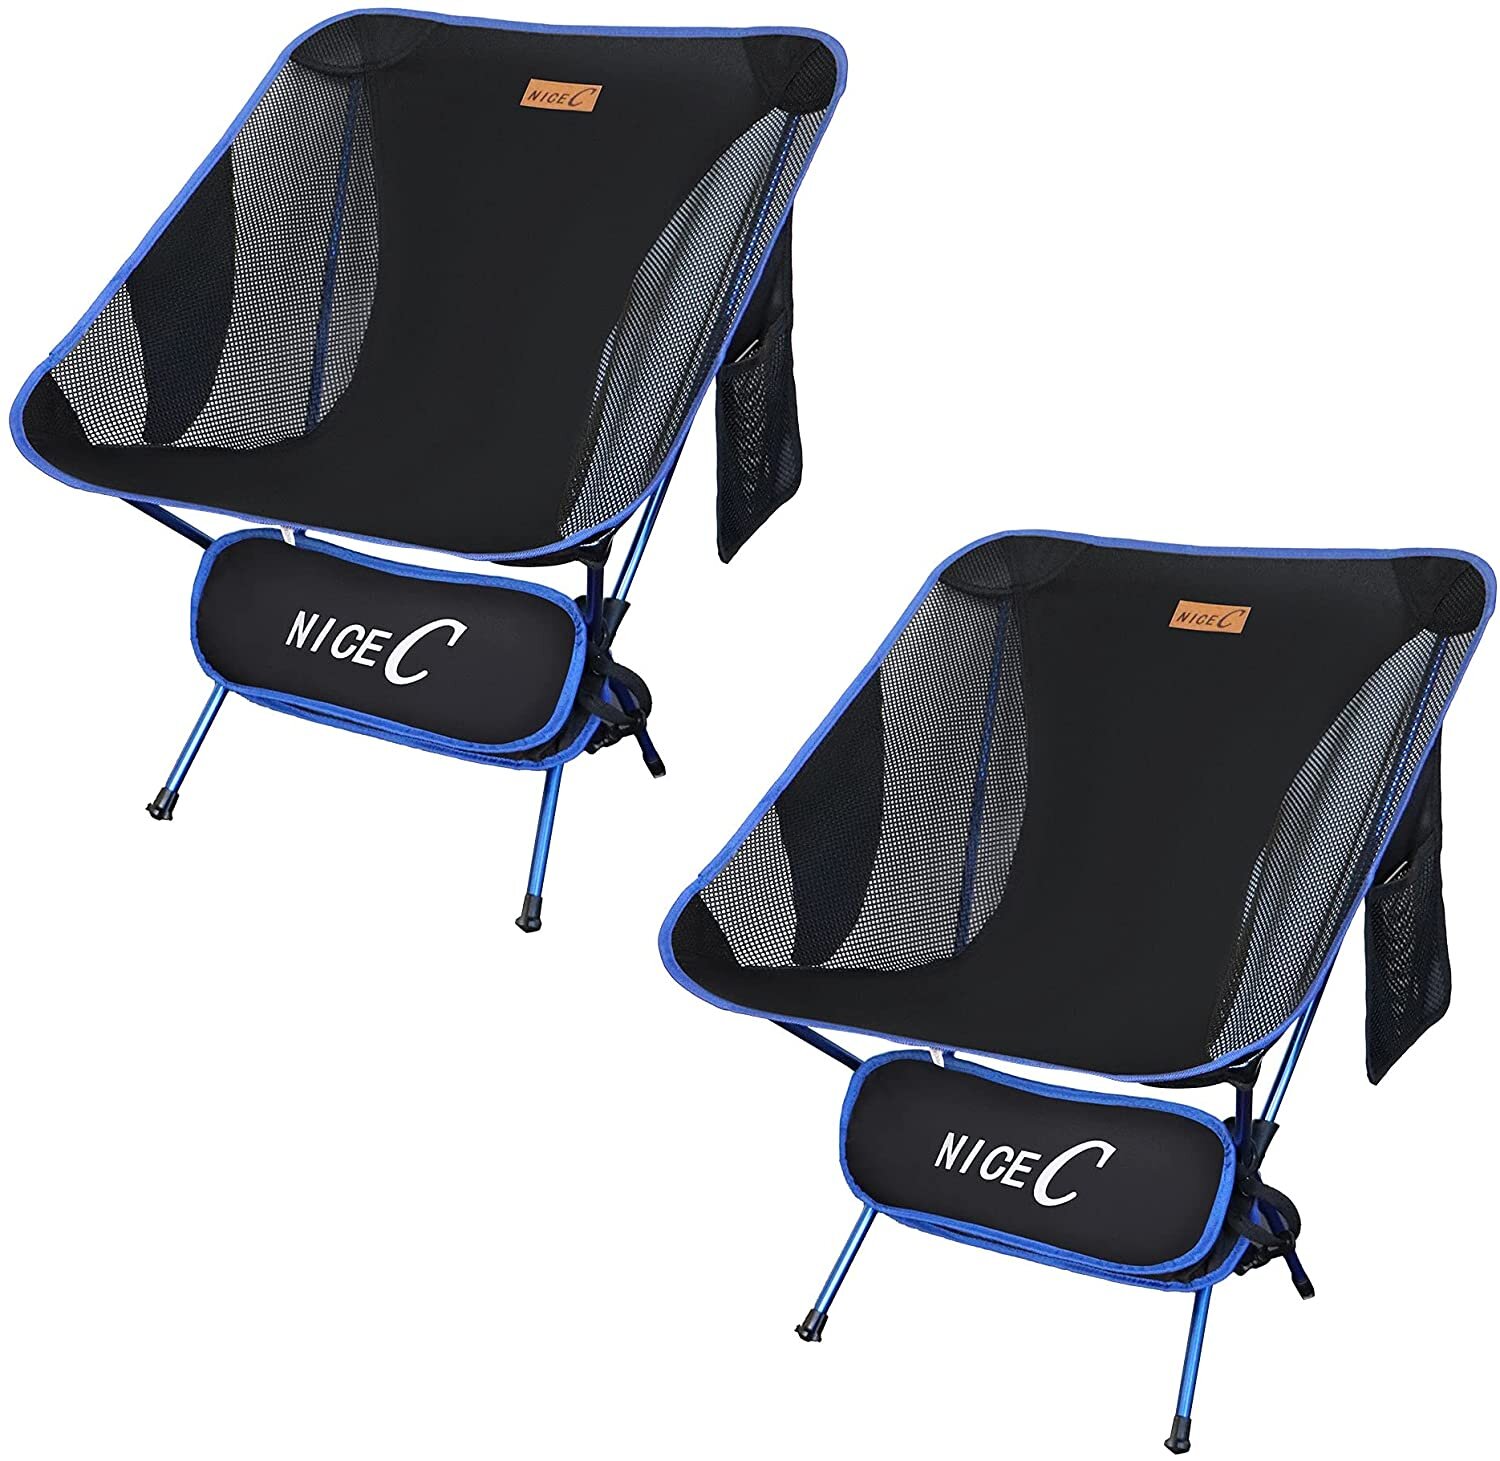 Details about   Oversized Padded Folding Chair Patio Recliner W/ Headrest & Cup Holder 5 Colors 